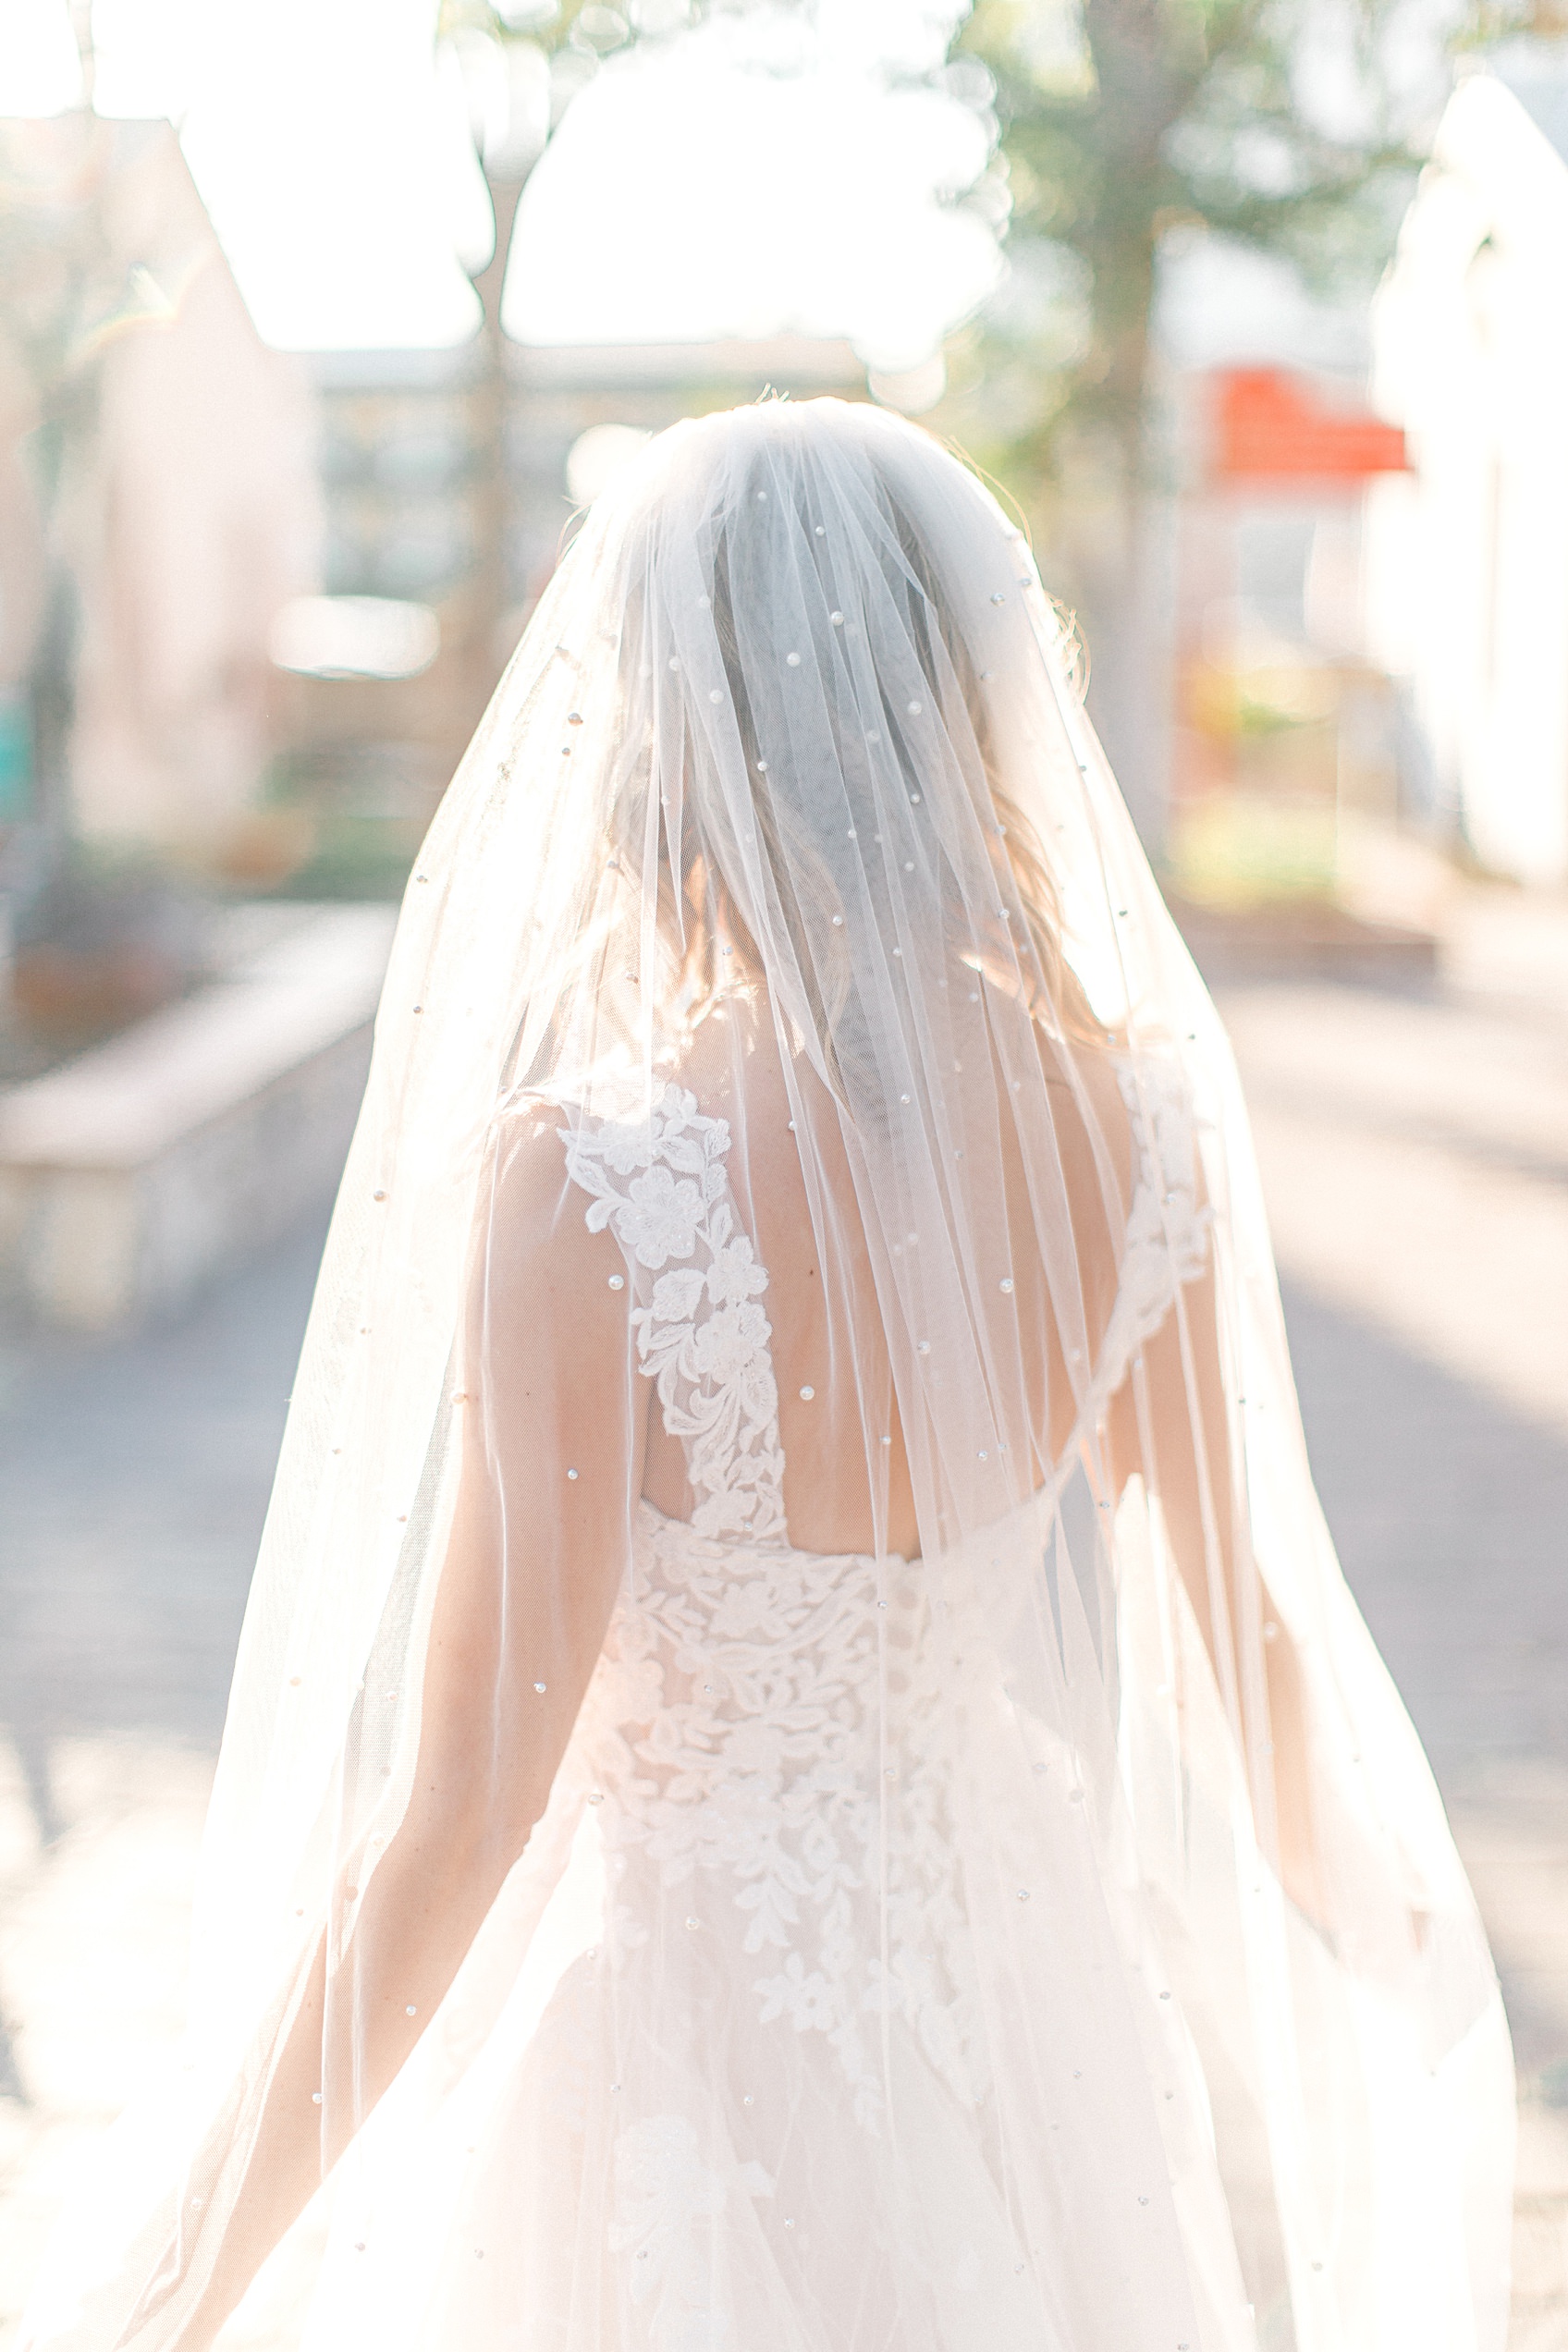 Downtown San Antonio Bridal Photography Session by Allison Jeffers Wedding Photography 0020